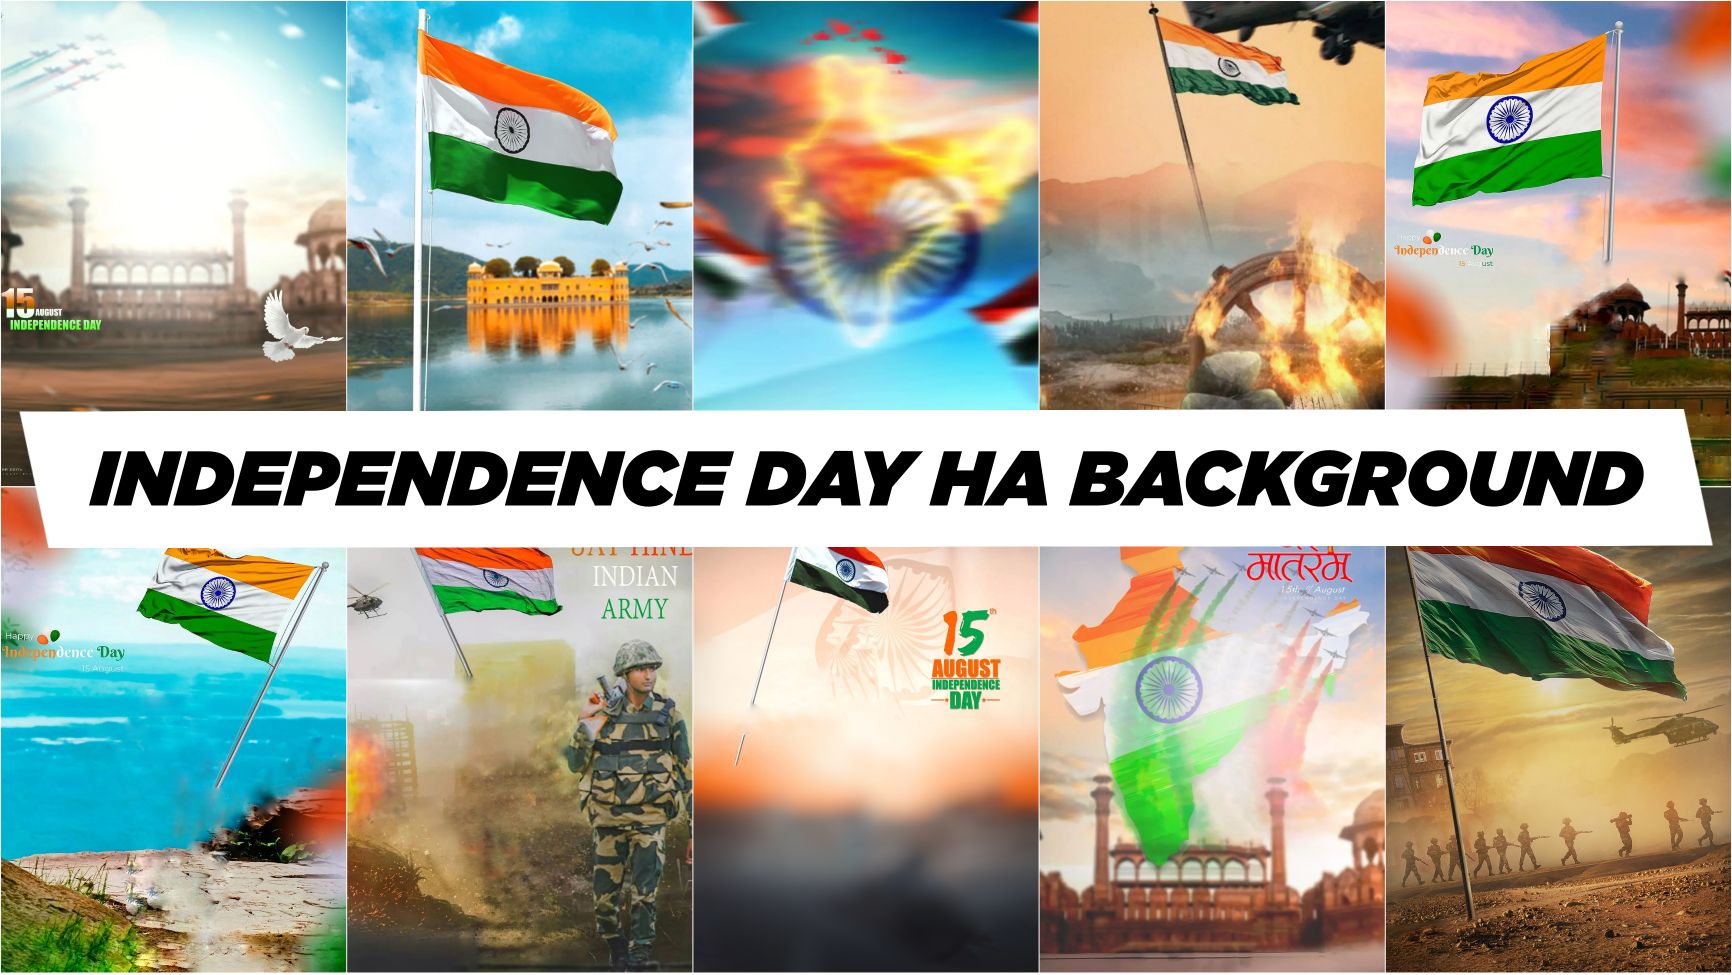 Independence day editing background Archives - Rajan Editz